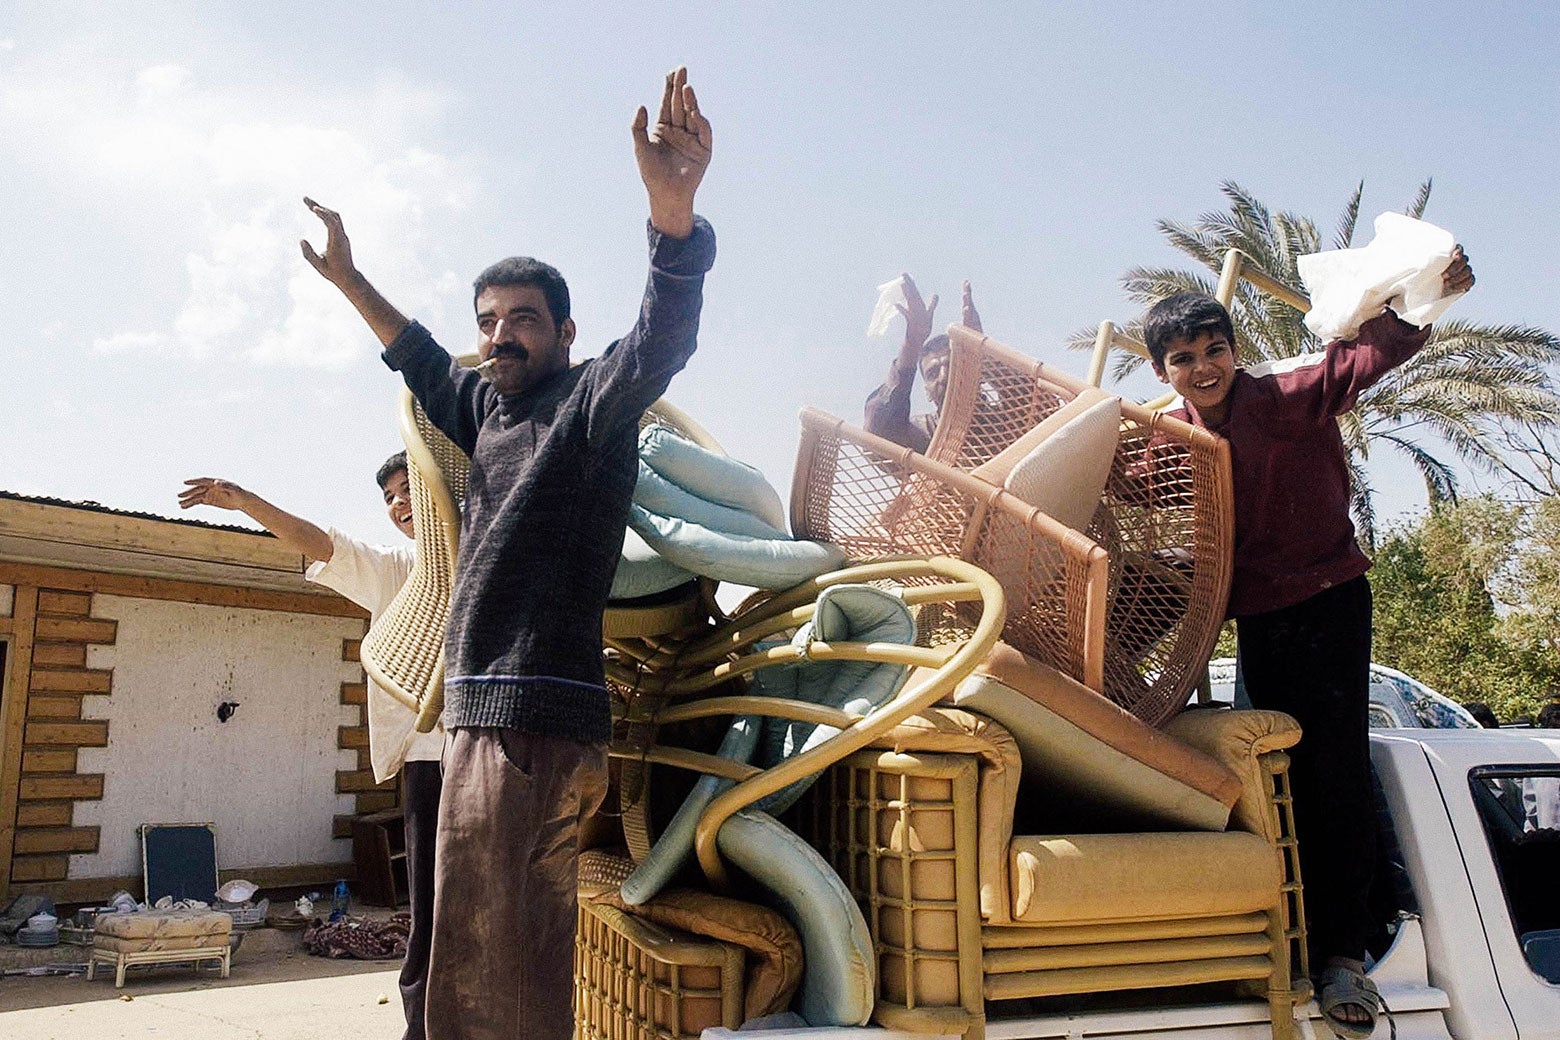 Iraqis stand in the back of a truck piled high with furniture.